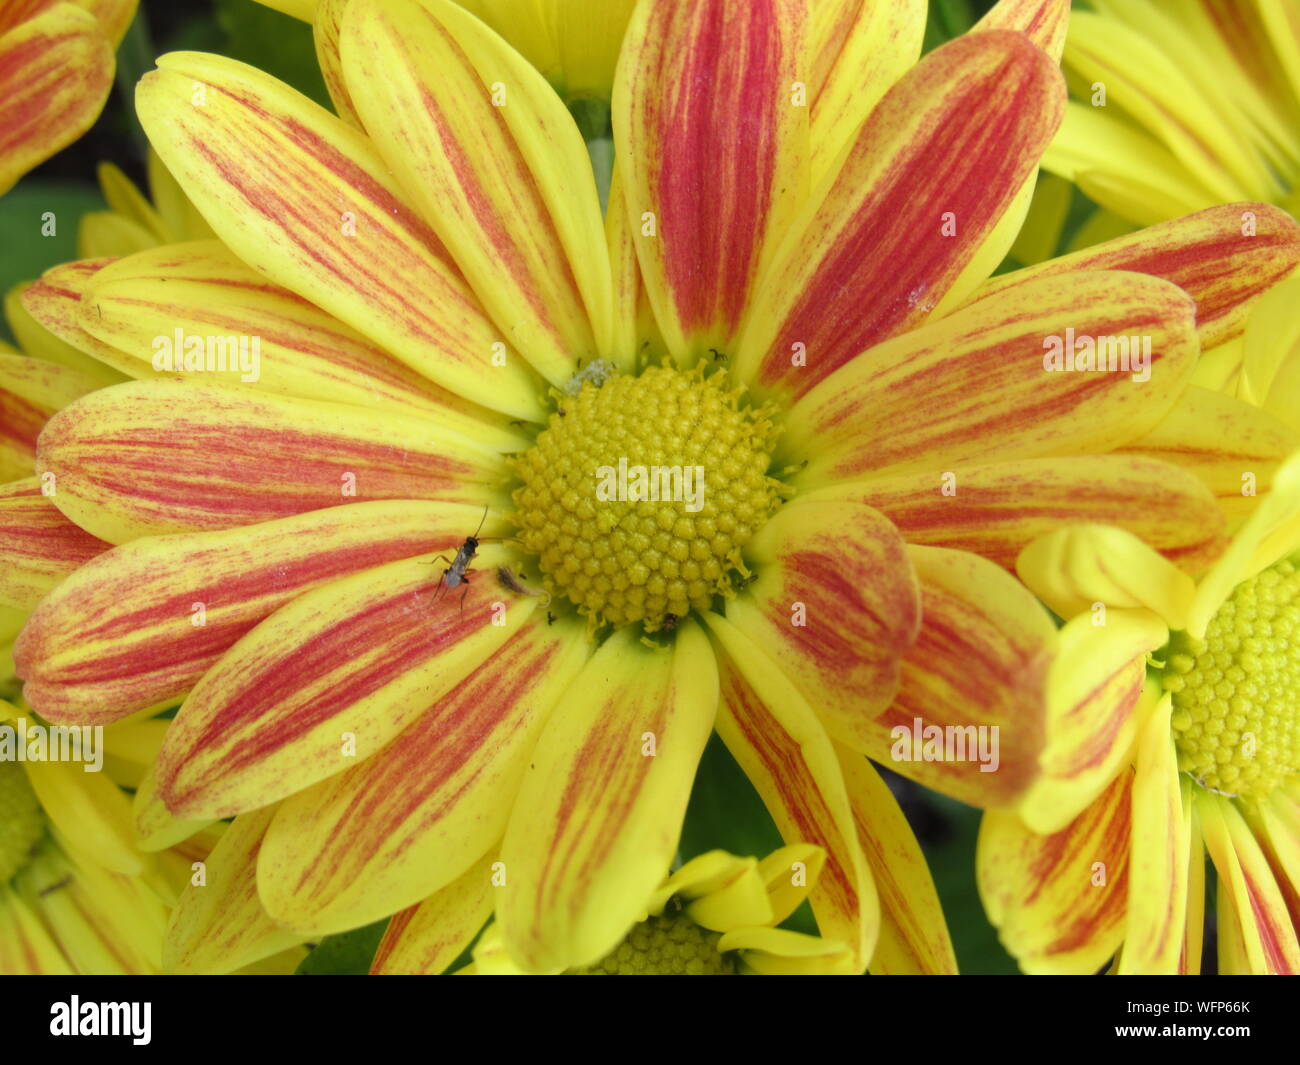 Macro photo of a yellow Chrysanthemum with red on the petals attracting  a small winged insect Stock Photo